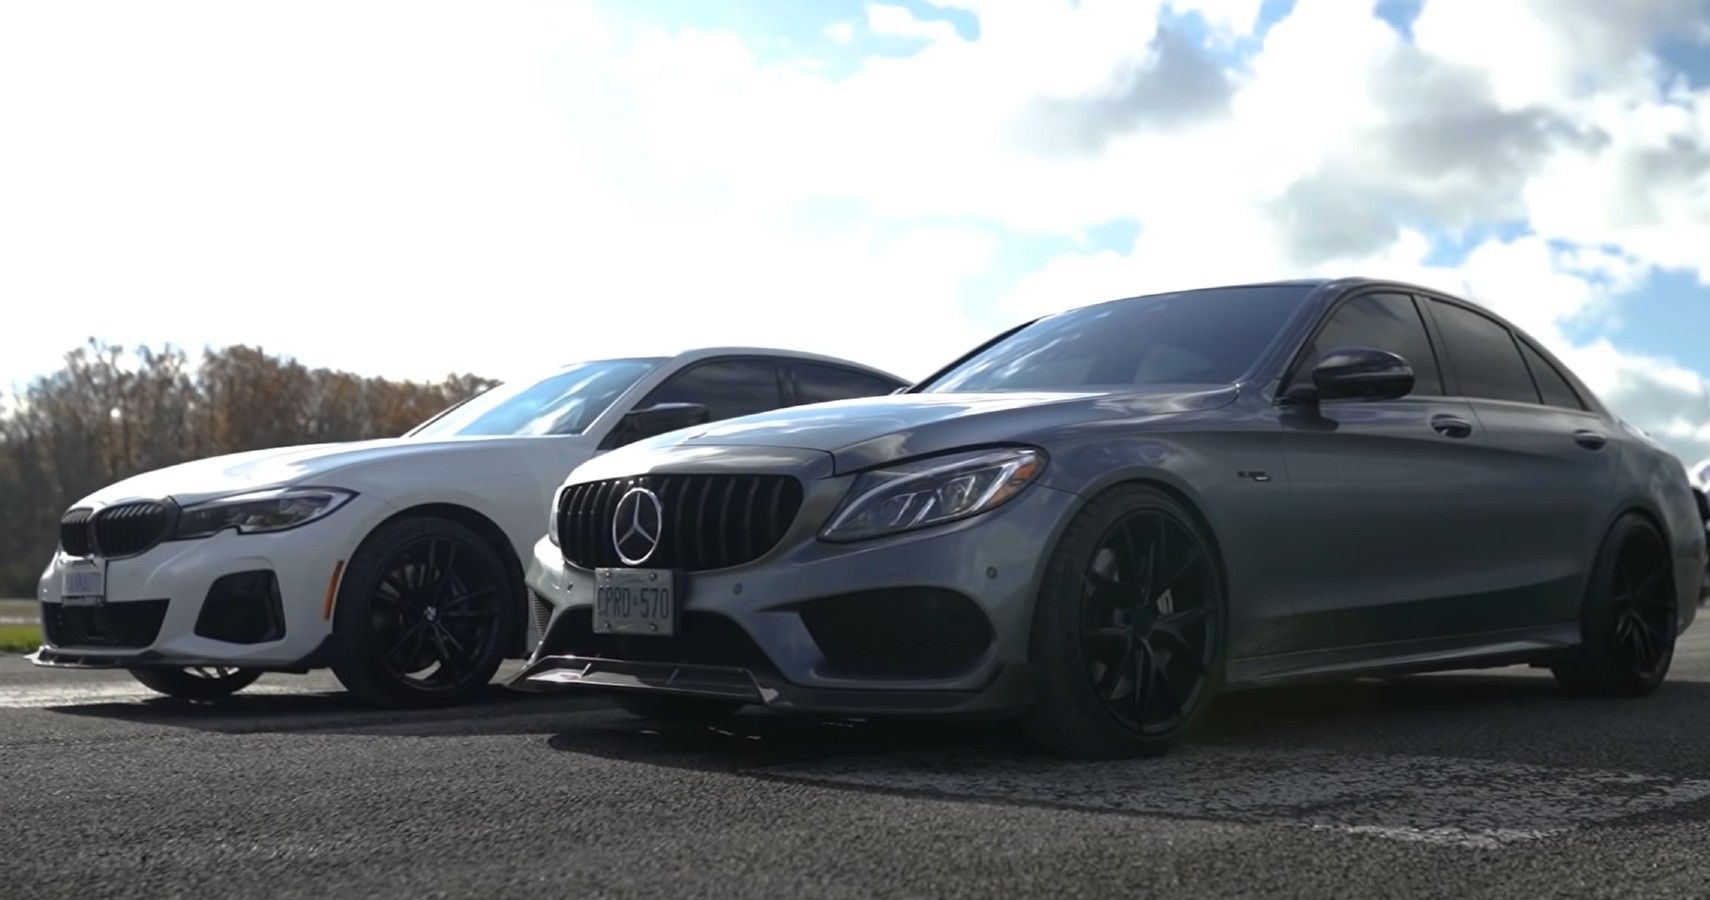 Tuned BMW and Mercedes drag race